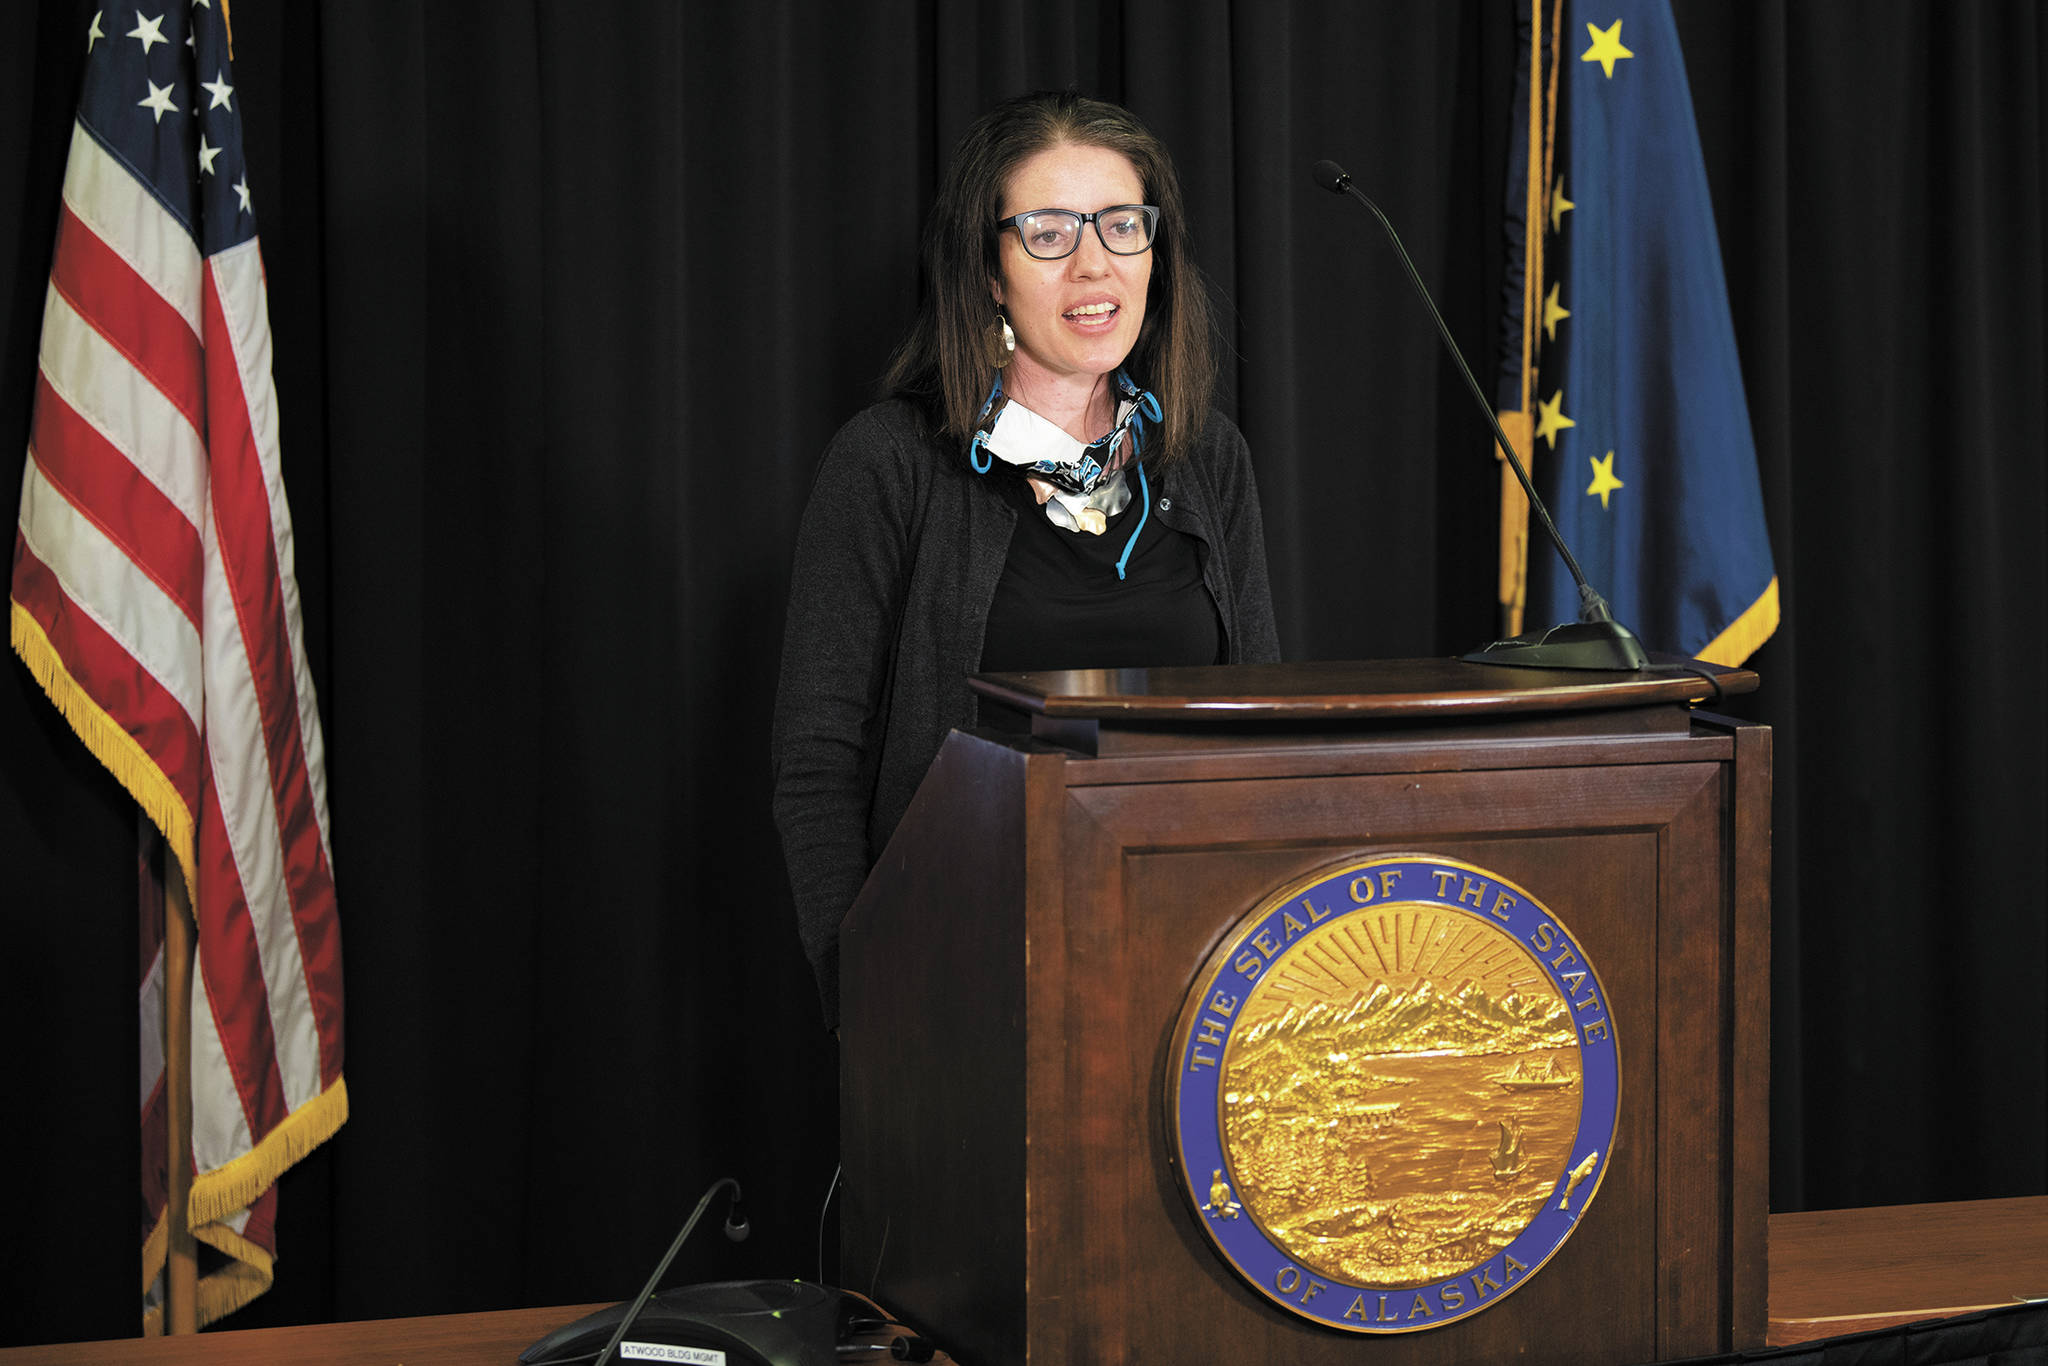 Dr. Anne Zink, Alaska’s chief medical officer, speaks during a May 11, 2020 press conference in the Atwood Building in Anchorage, Alaska. (Photo courtesy Office of the Governor)